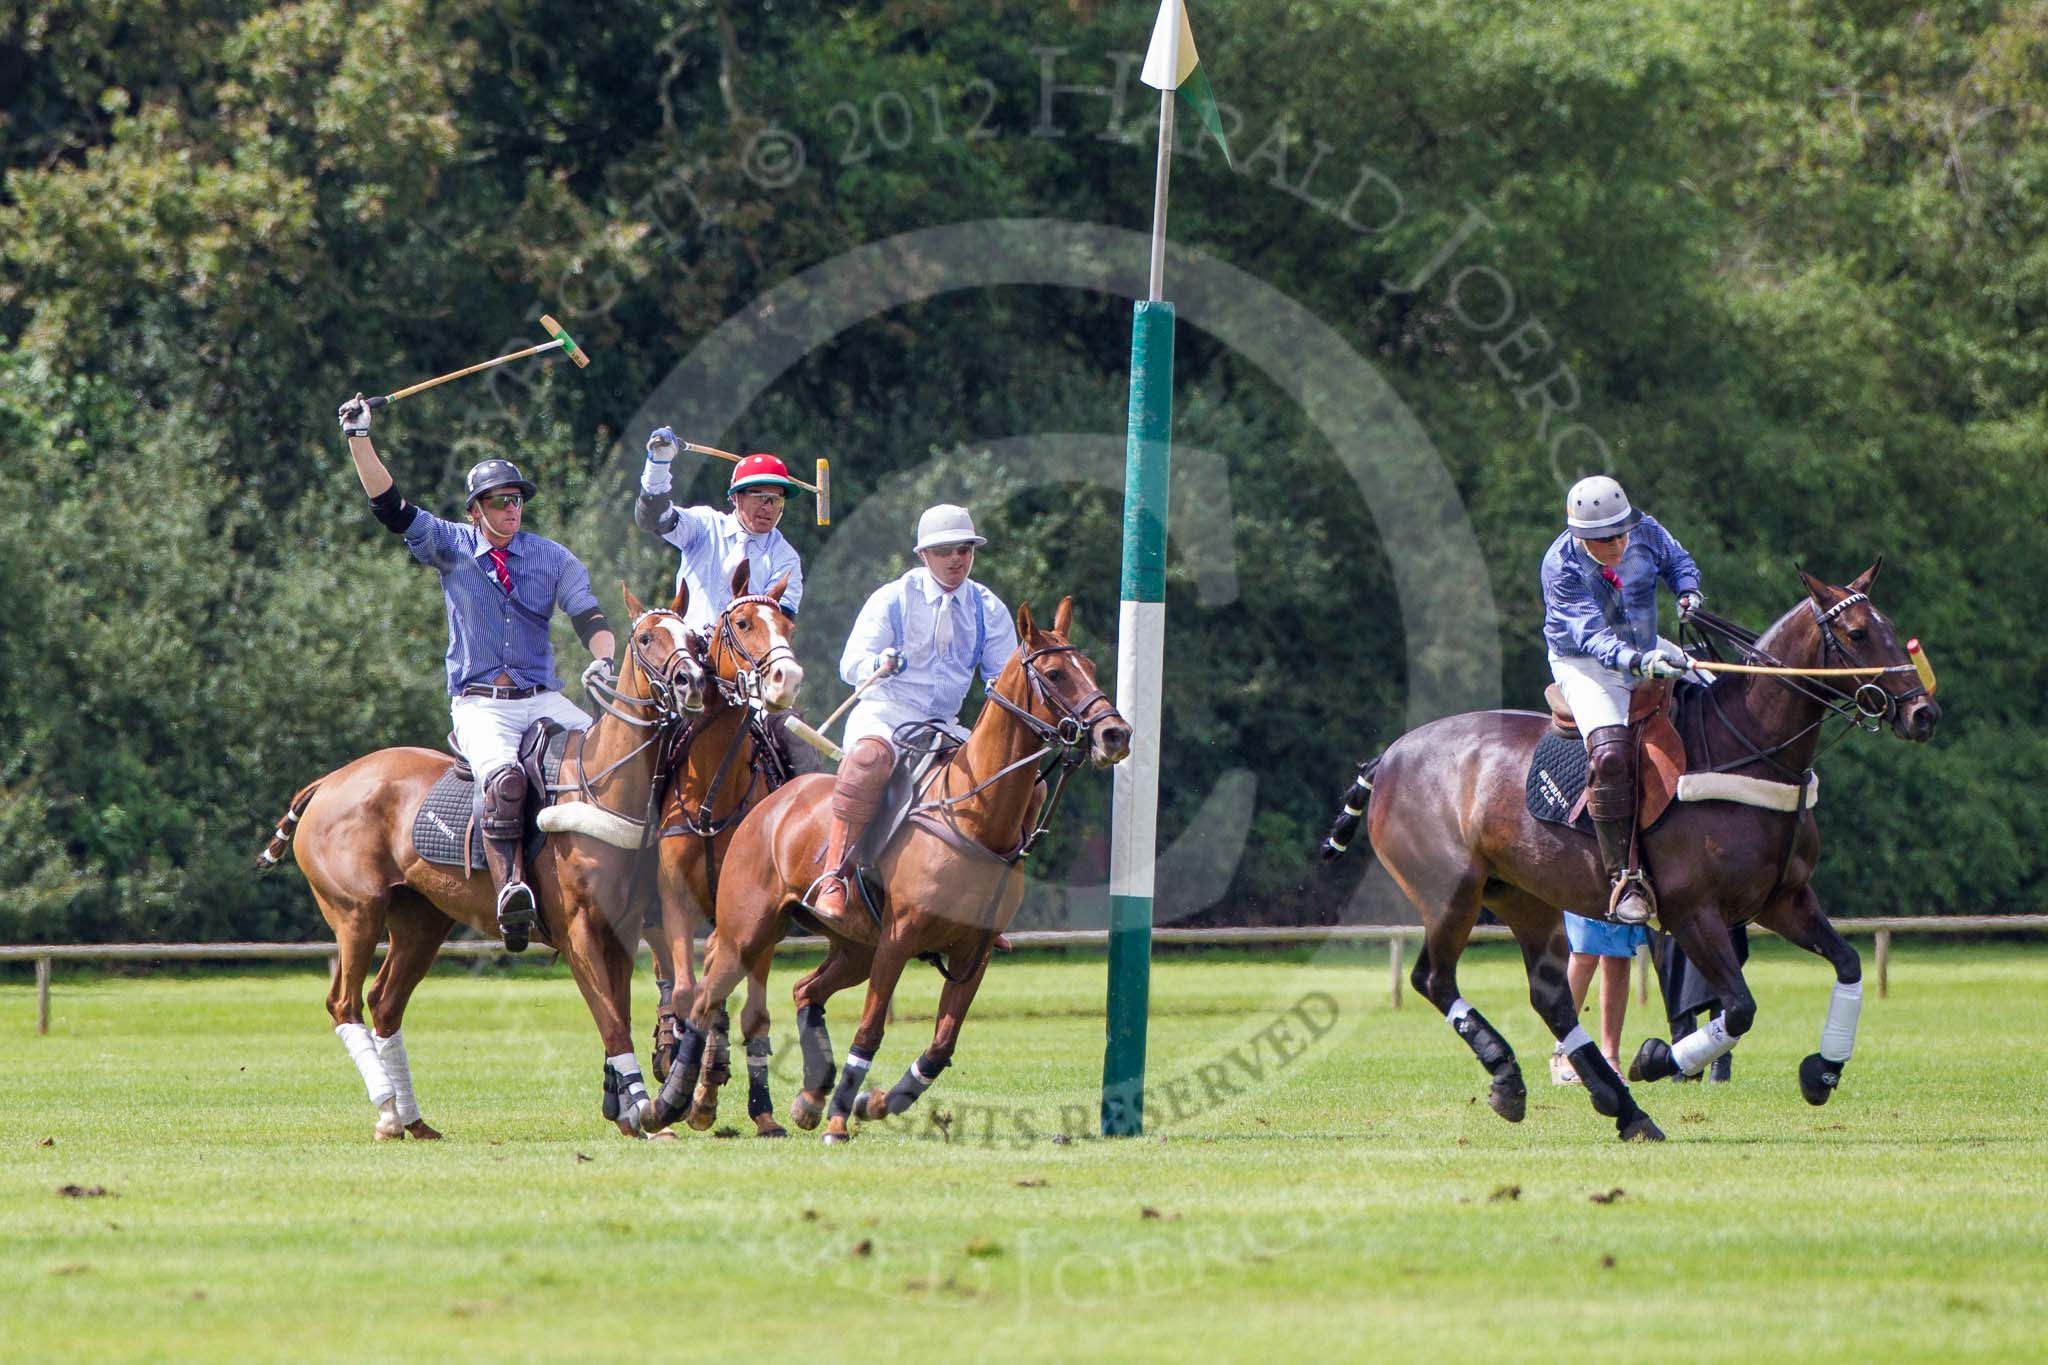 7th Heritage Polo Cup finals: Parke Bradley..
Hurtwood Park Polo Club,
Ewhurst Green,
Surrey,
United Kingdom,
on 05 August 2012 at 14:05, image #61